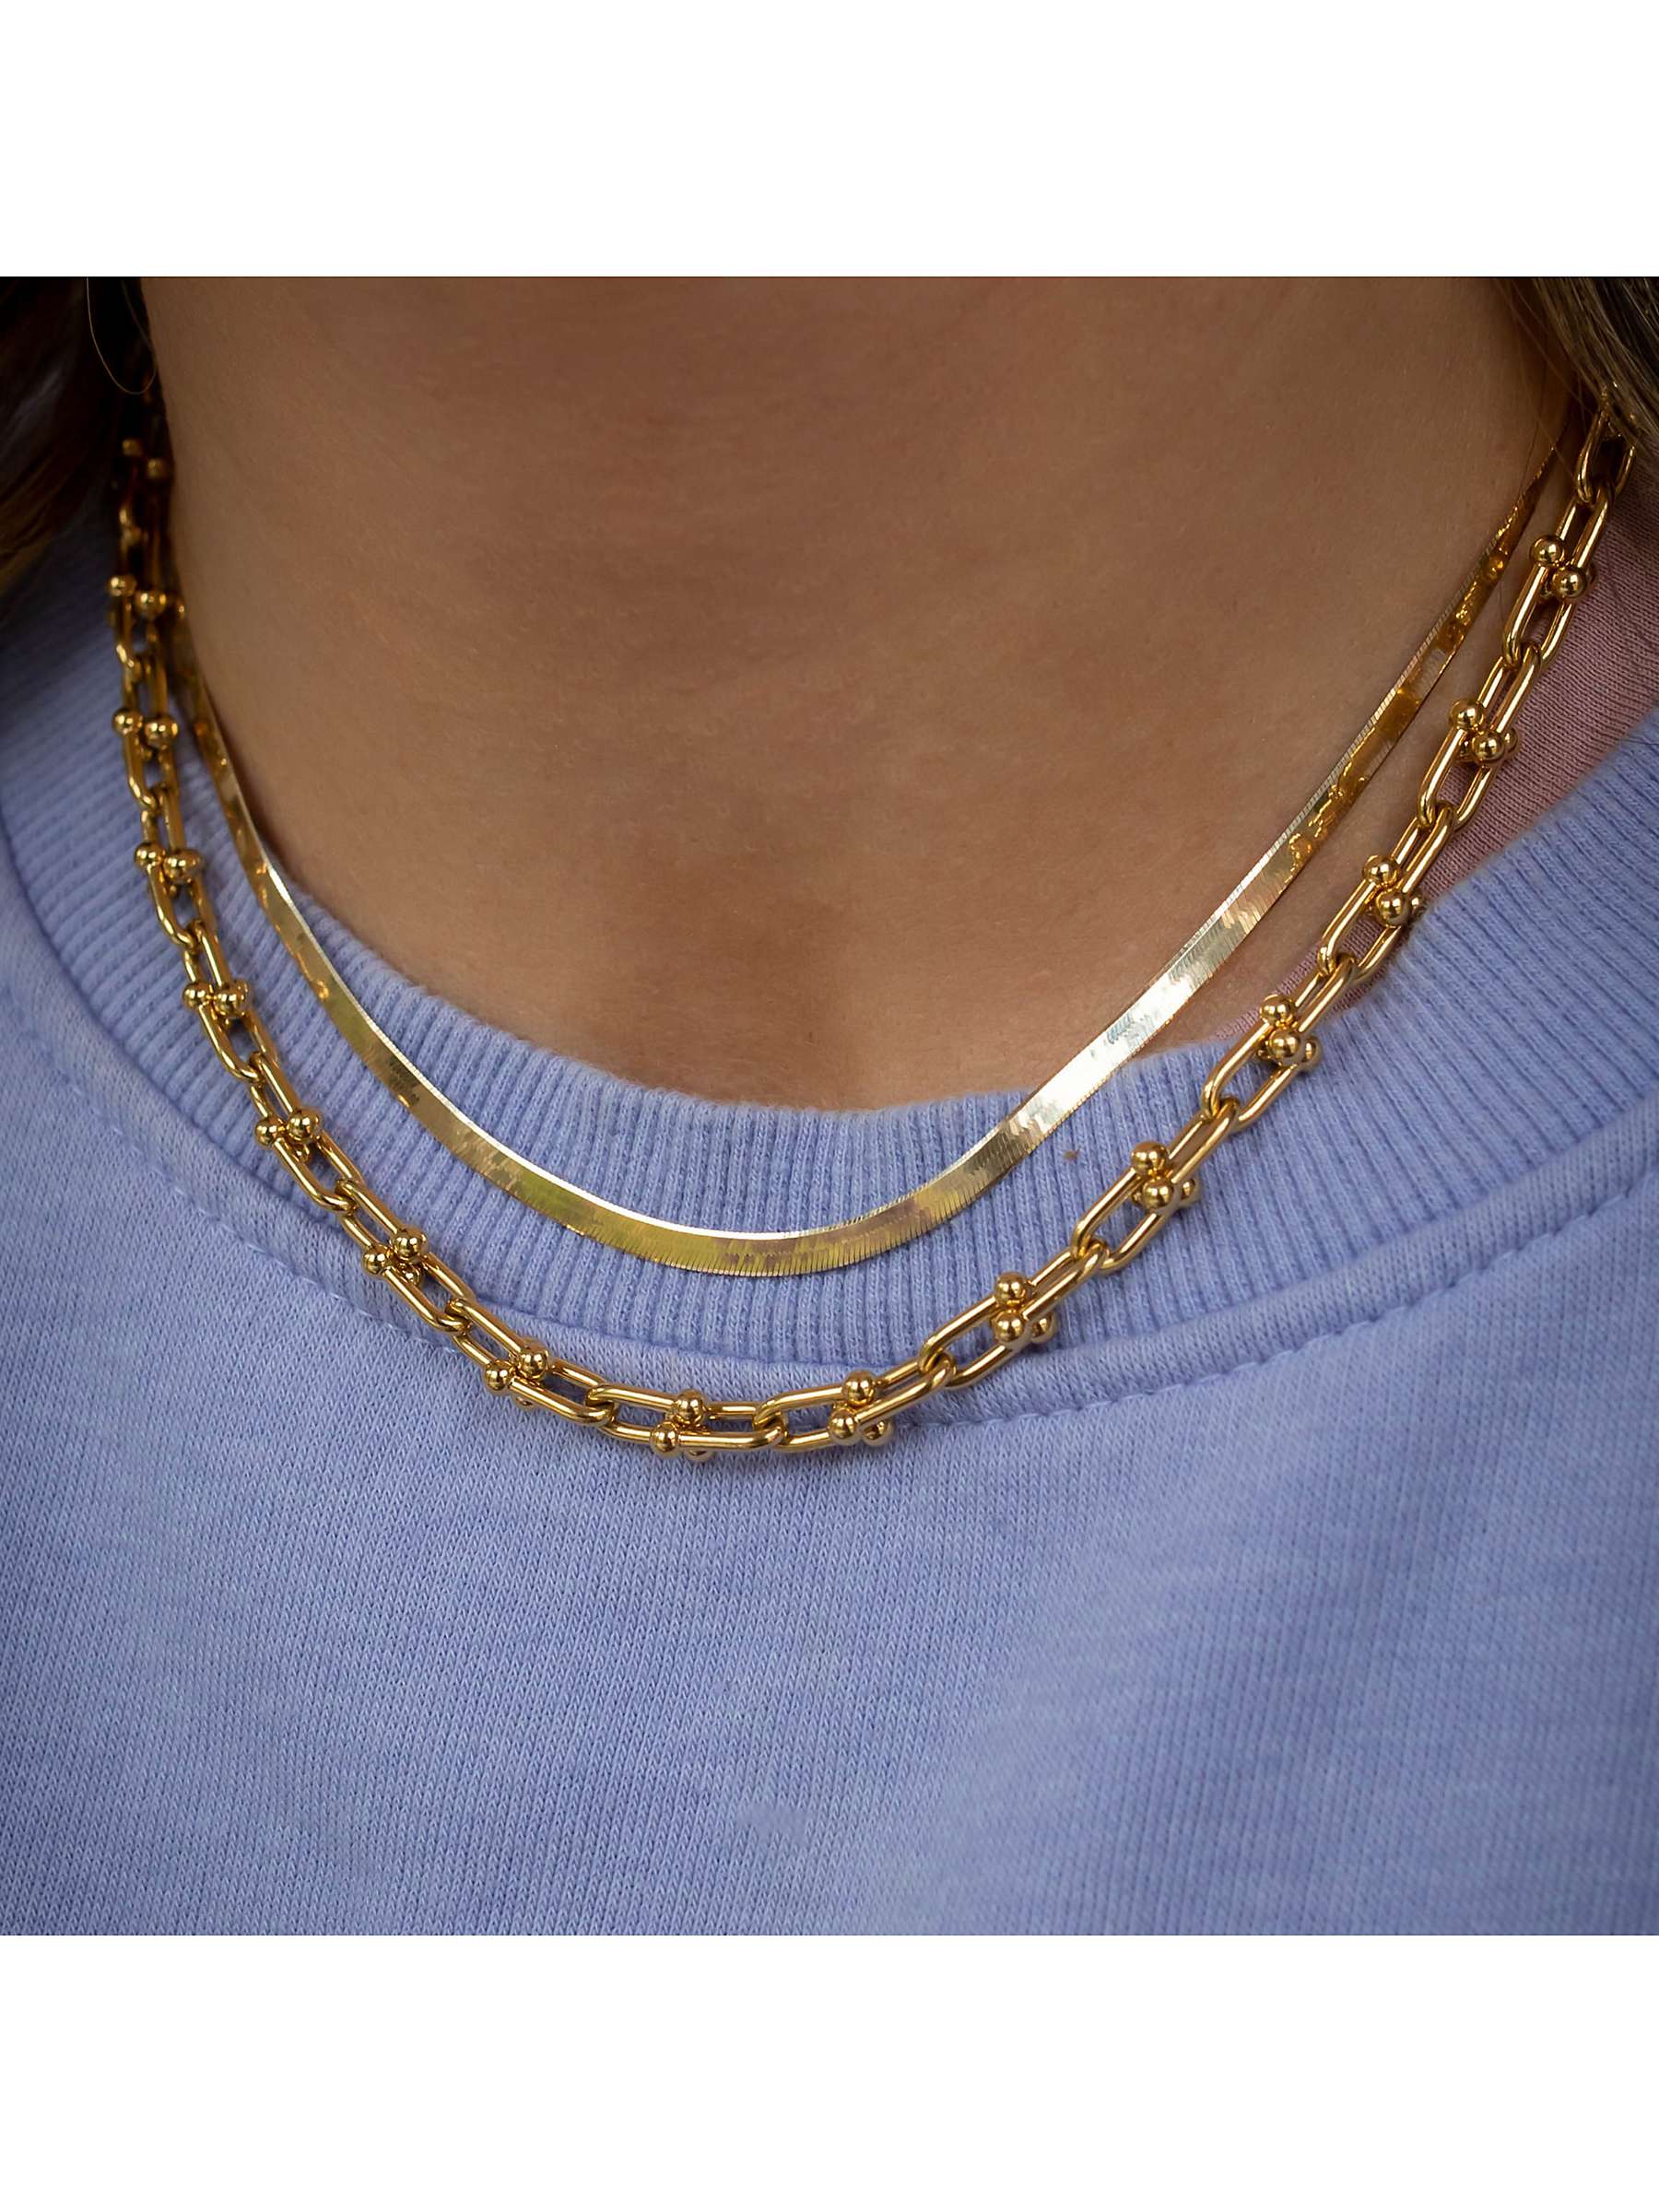 Buy Leah Alexandra Thalie Chain Necklace, Gold Online at johnlewis.com